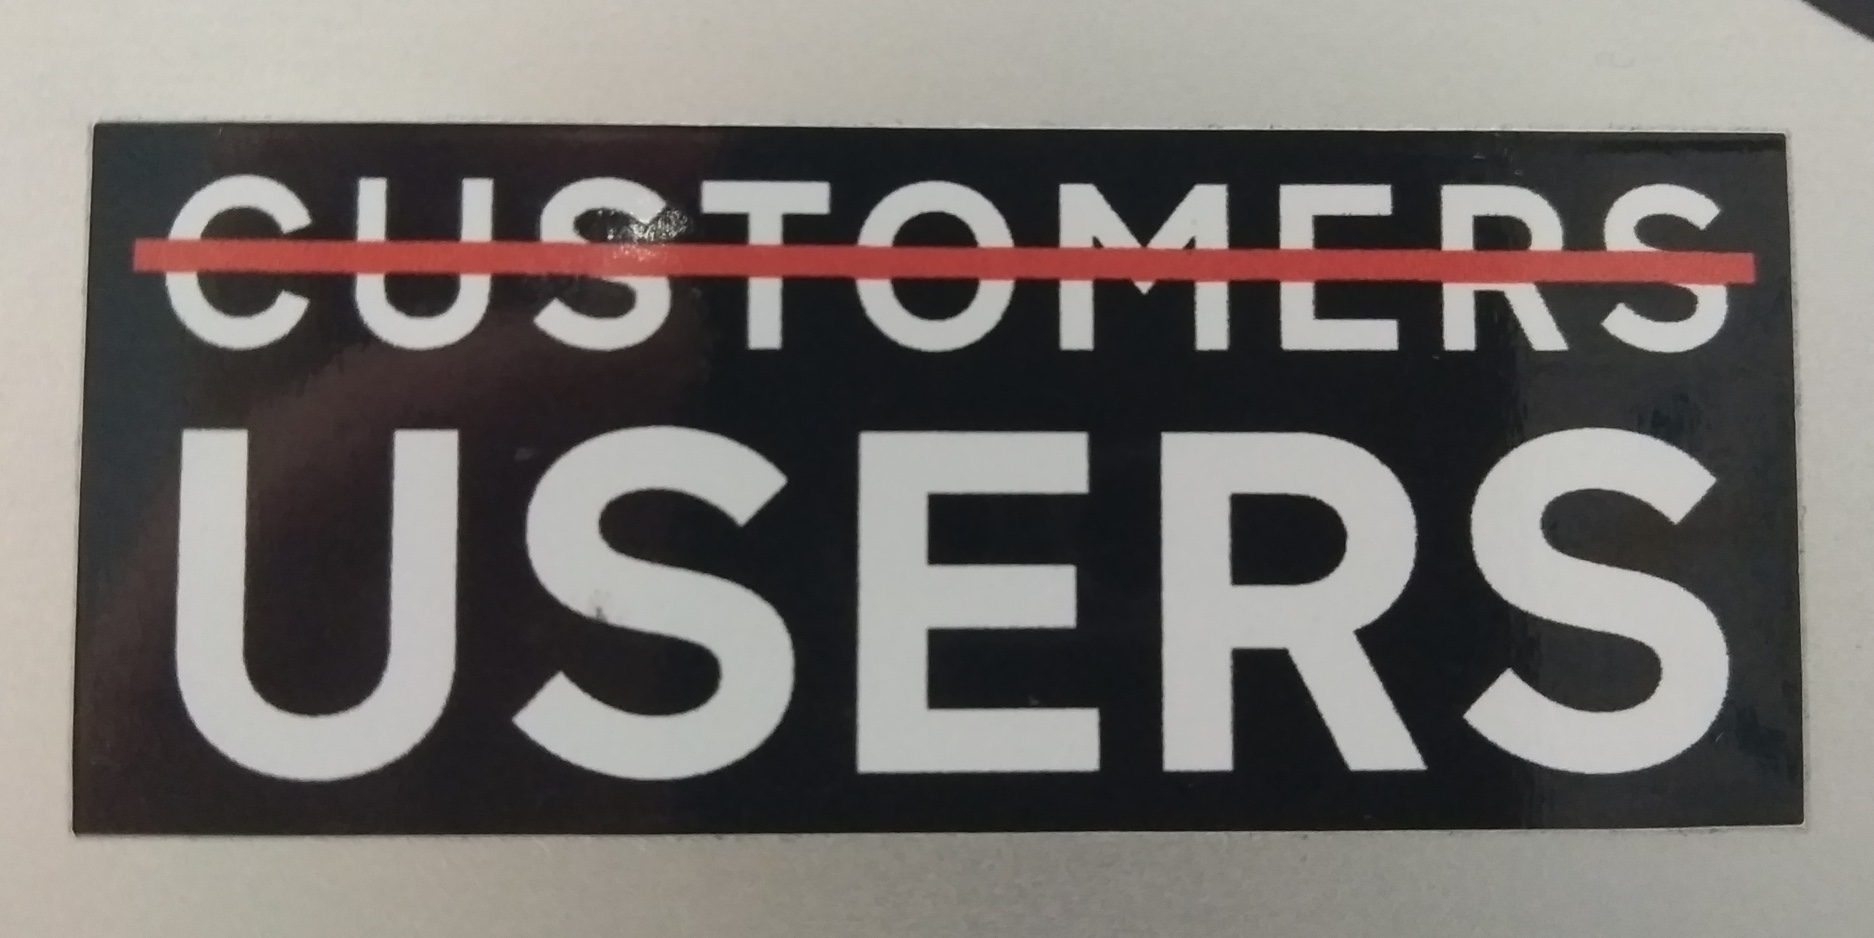 A sticker that used to circulate in design circles in UK Government department, showing the word 'customers' striked out and a big 'users' instead.